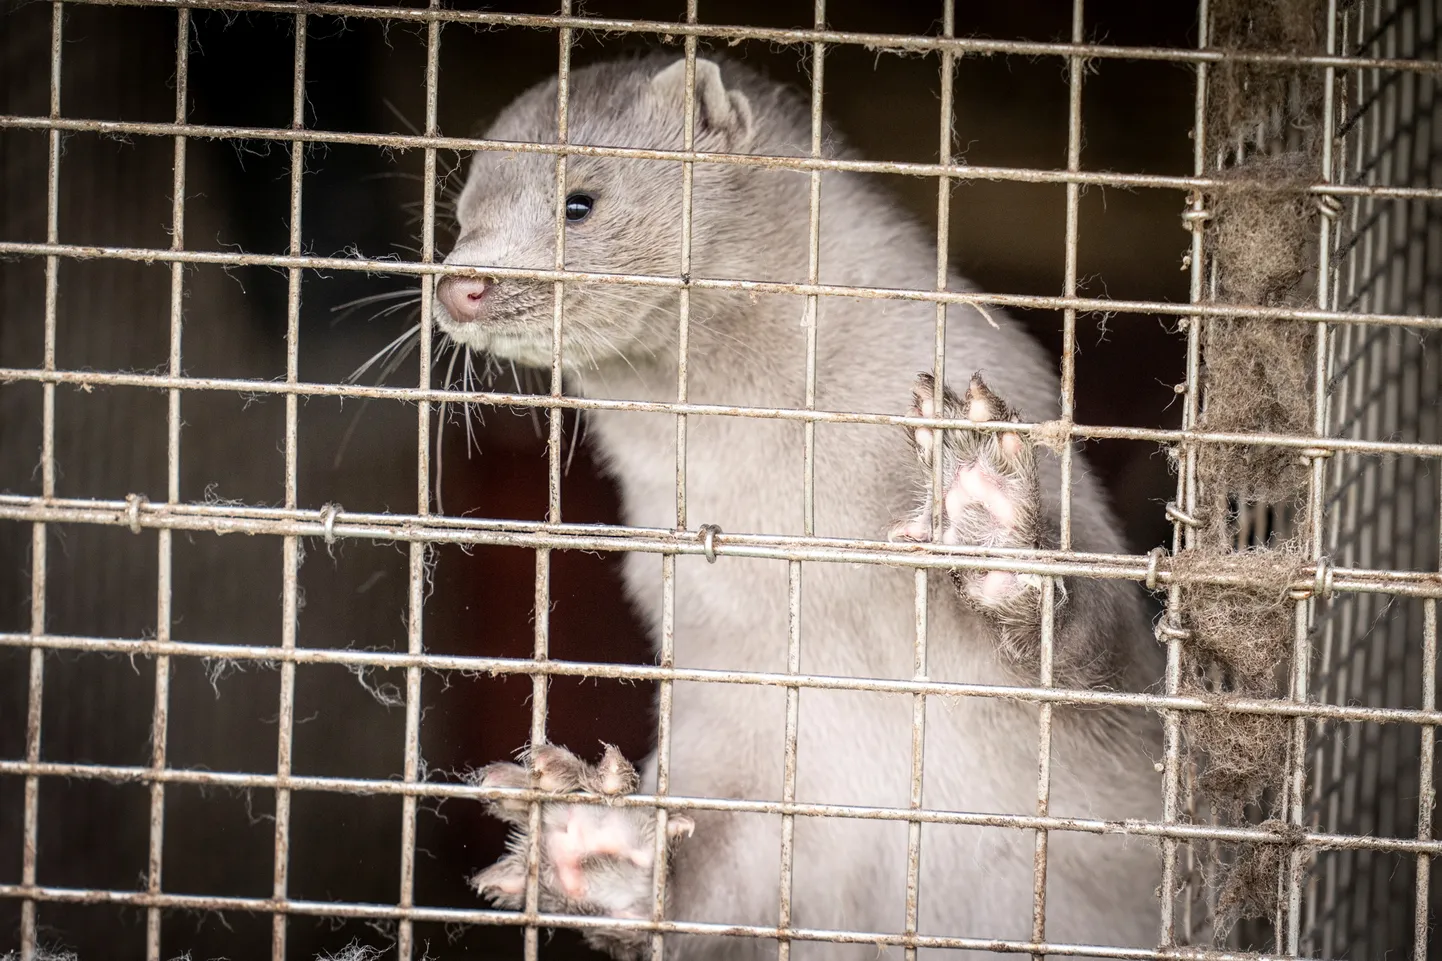 A caged mink looks on, amid the coronavirus disease (COVID-19) outbreak, at a mink farm in Hjoerring in North Jutland, Denmark October 8, 2020. Picture taken October 8, 2020. Ritzau Scanpix/Mads Claus Rasmussen via REUTERS    ATTENTION EDITORS - THIS IMAGE WAS PROVIDED BY A THIRD PARTY. DENMARK OUT. NO COMMERCIAL OR EDITORIAL SALES IN DENMARK.